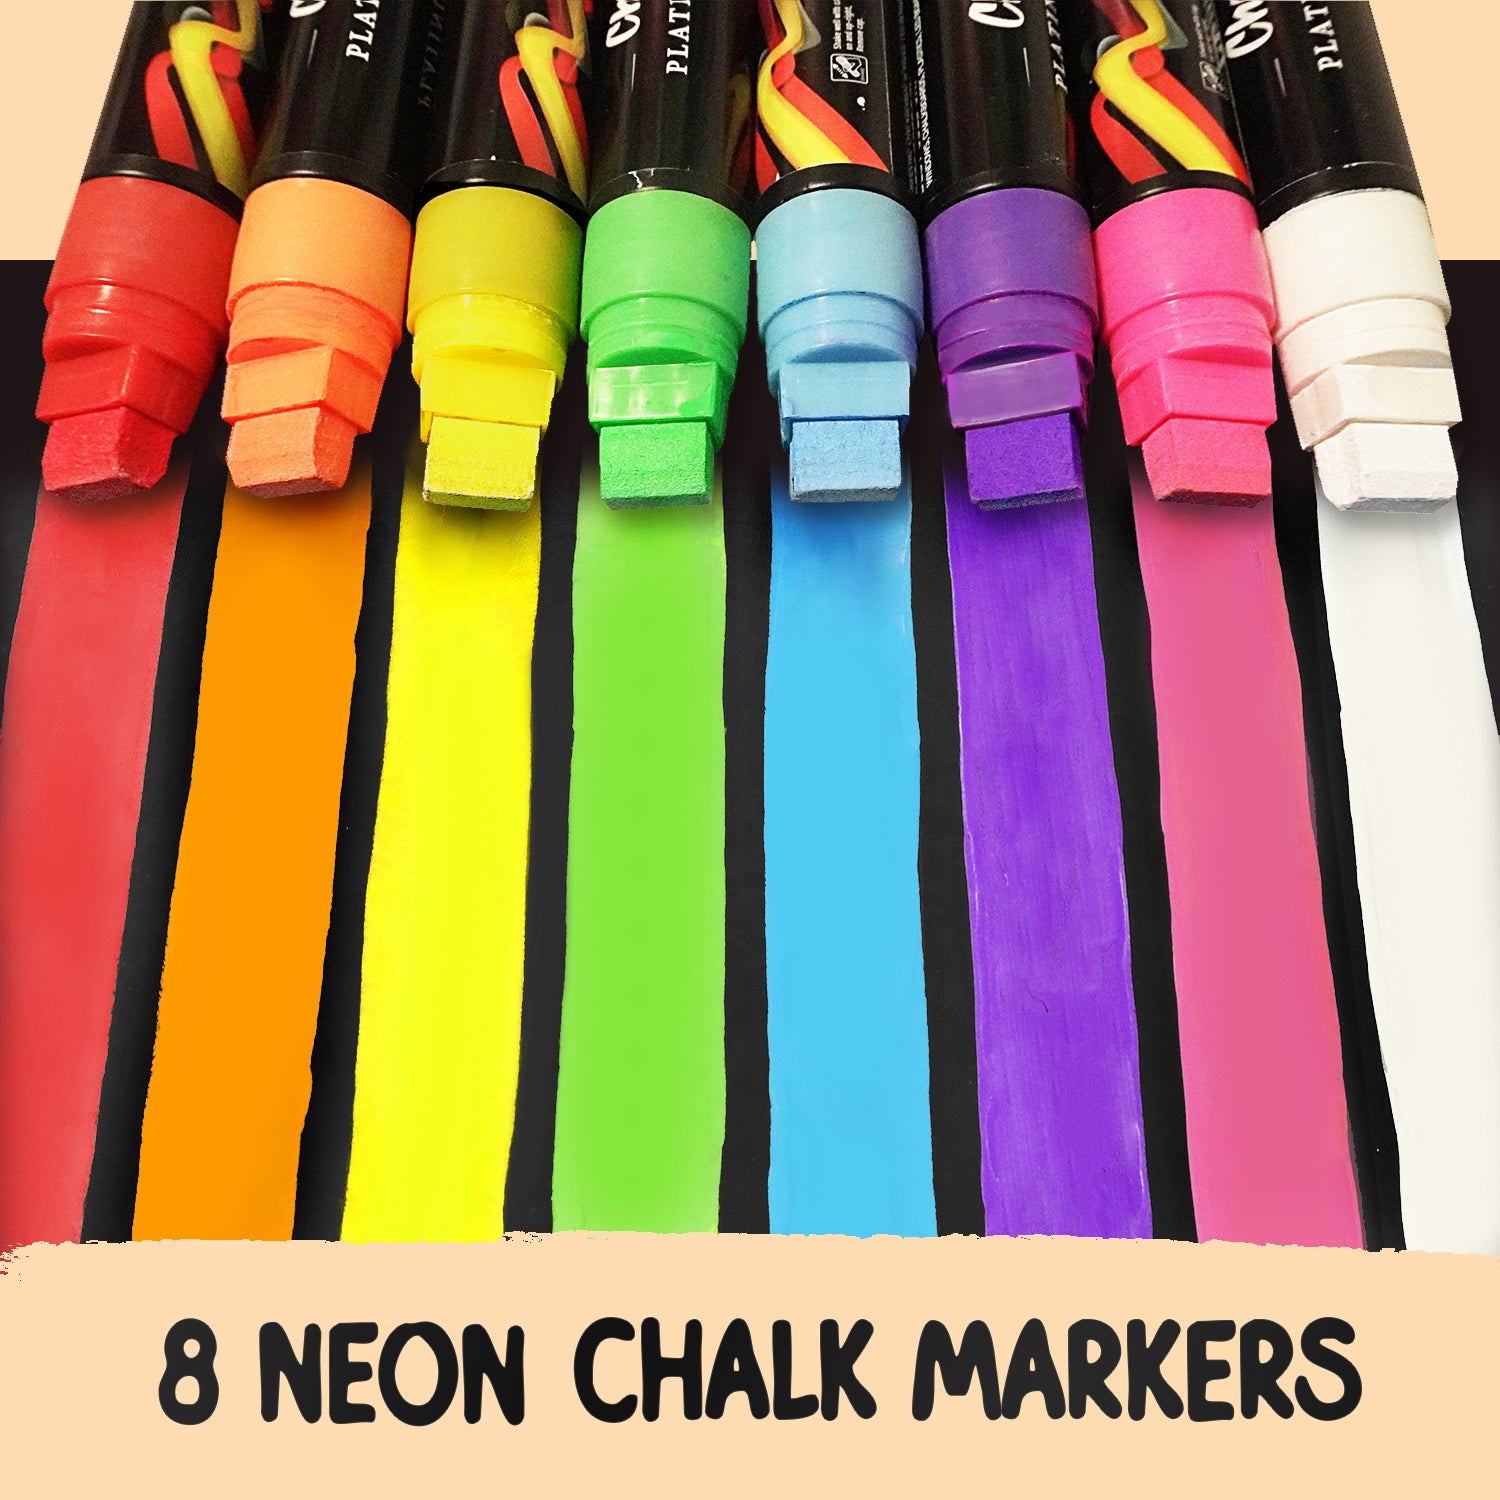 CHALKOLA chalk markers review - My First Go drawing on different